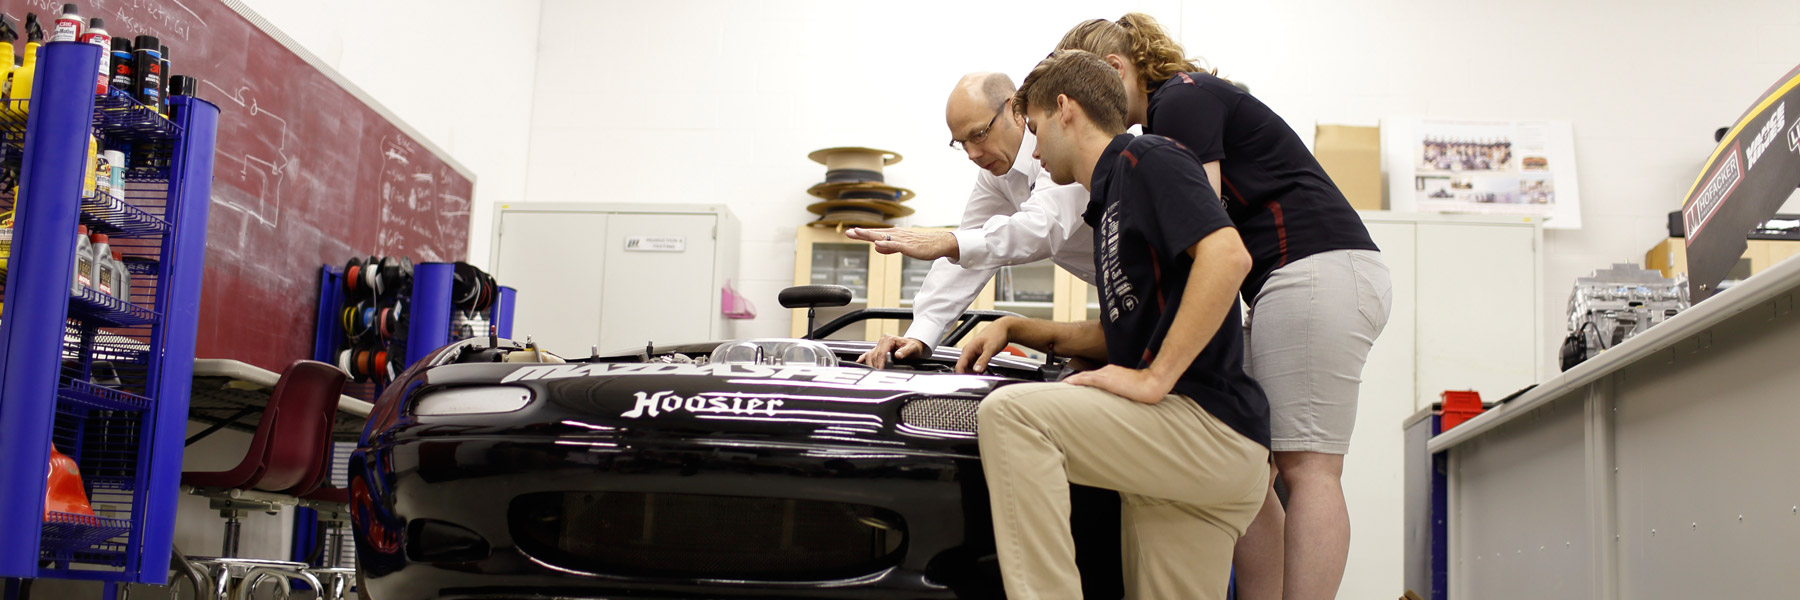 An instructor and two students examining the engine of a race car.